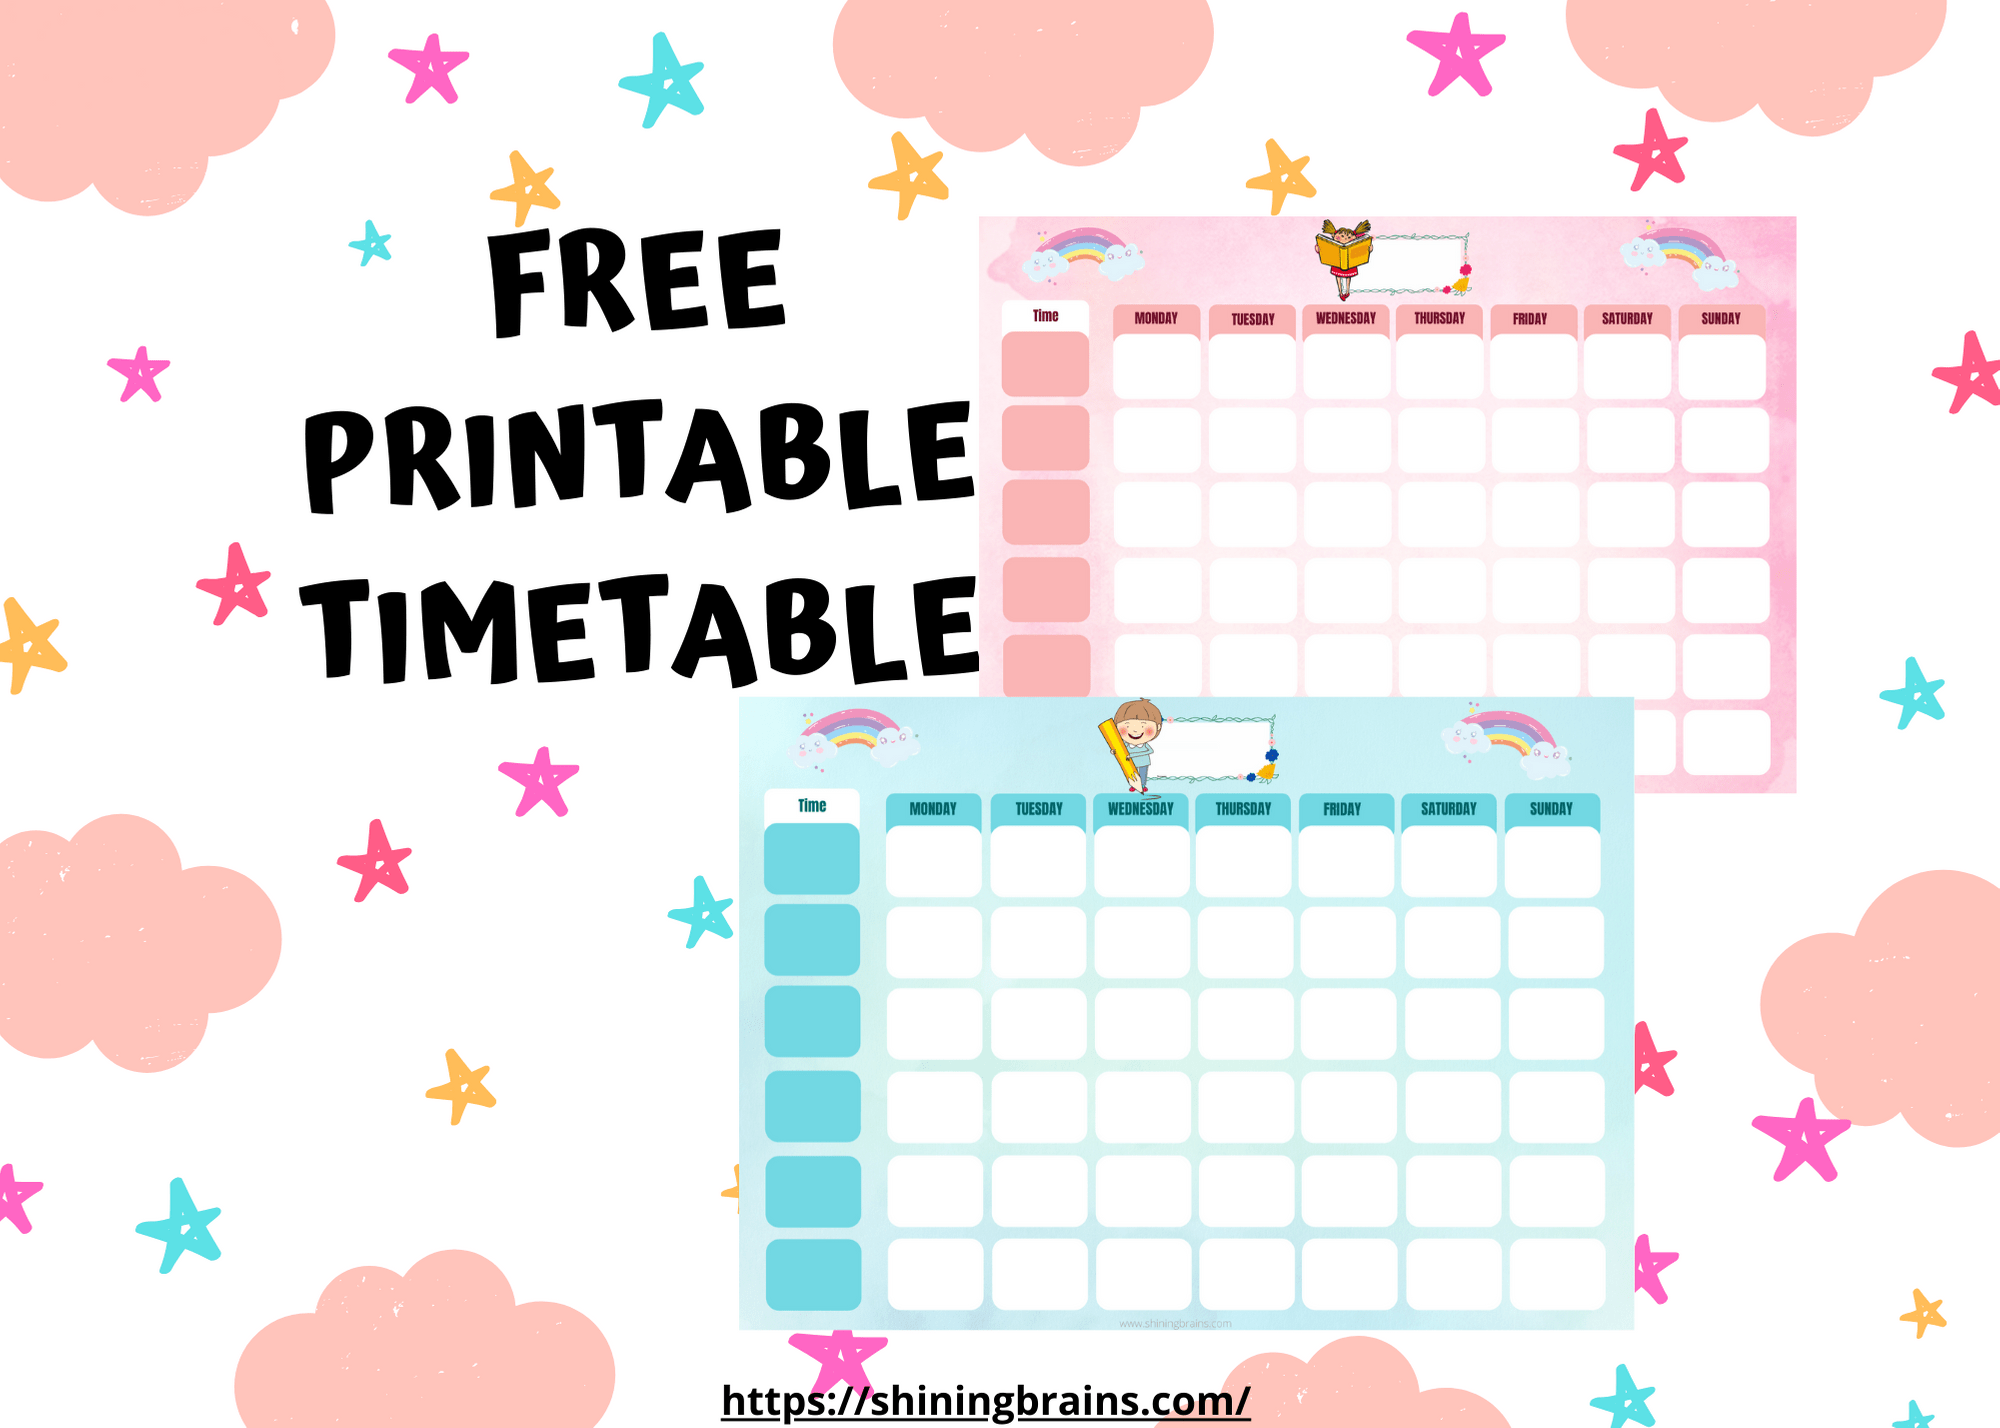 Timetable for kids Weekly Timetable Template Free Printable